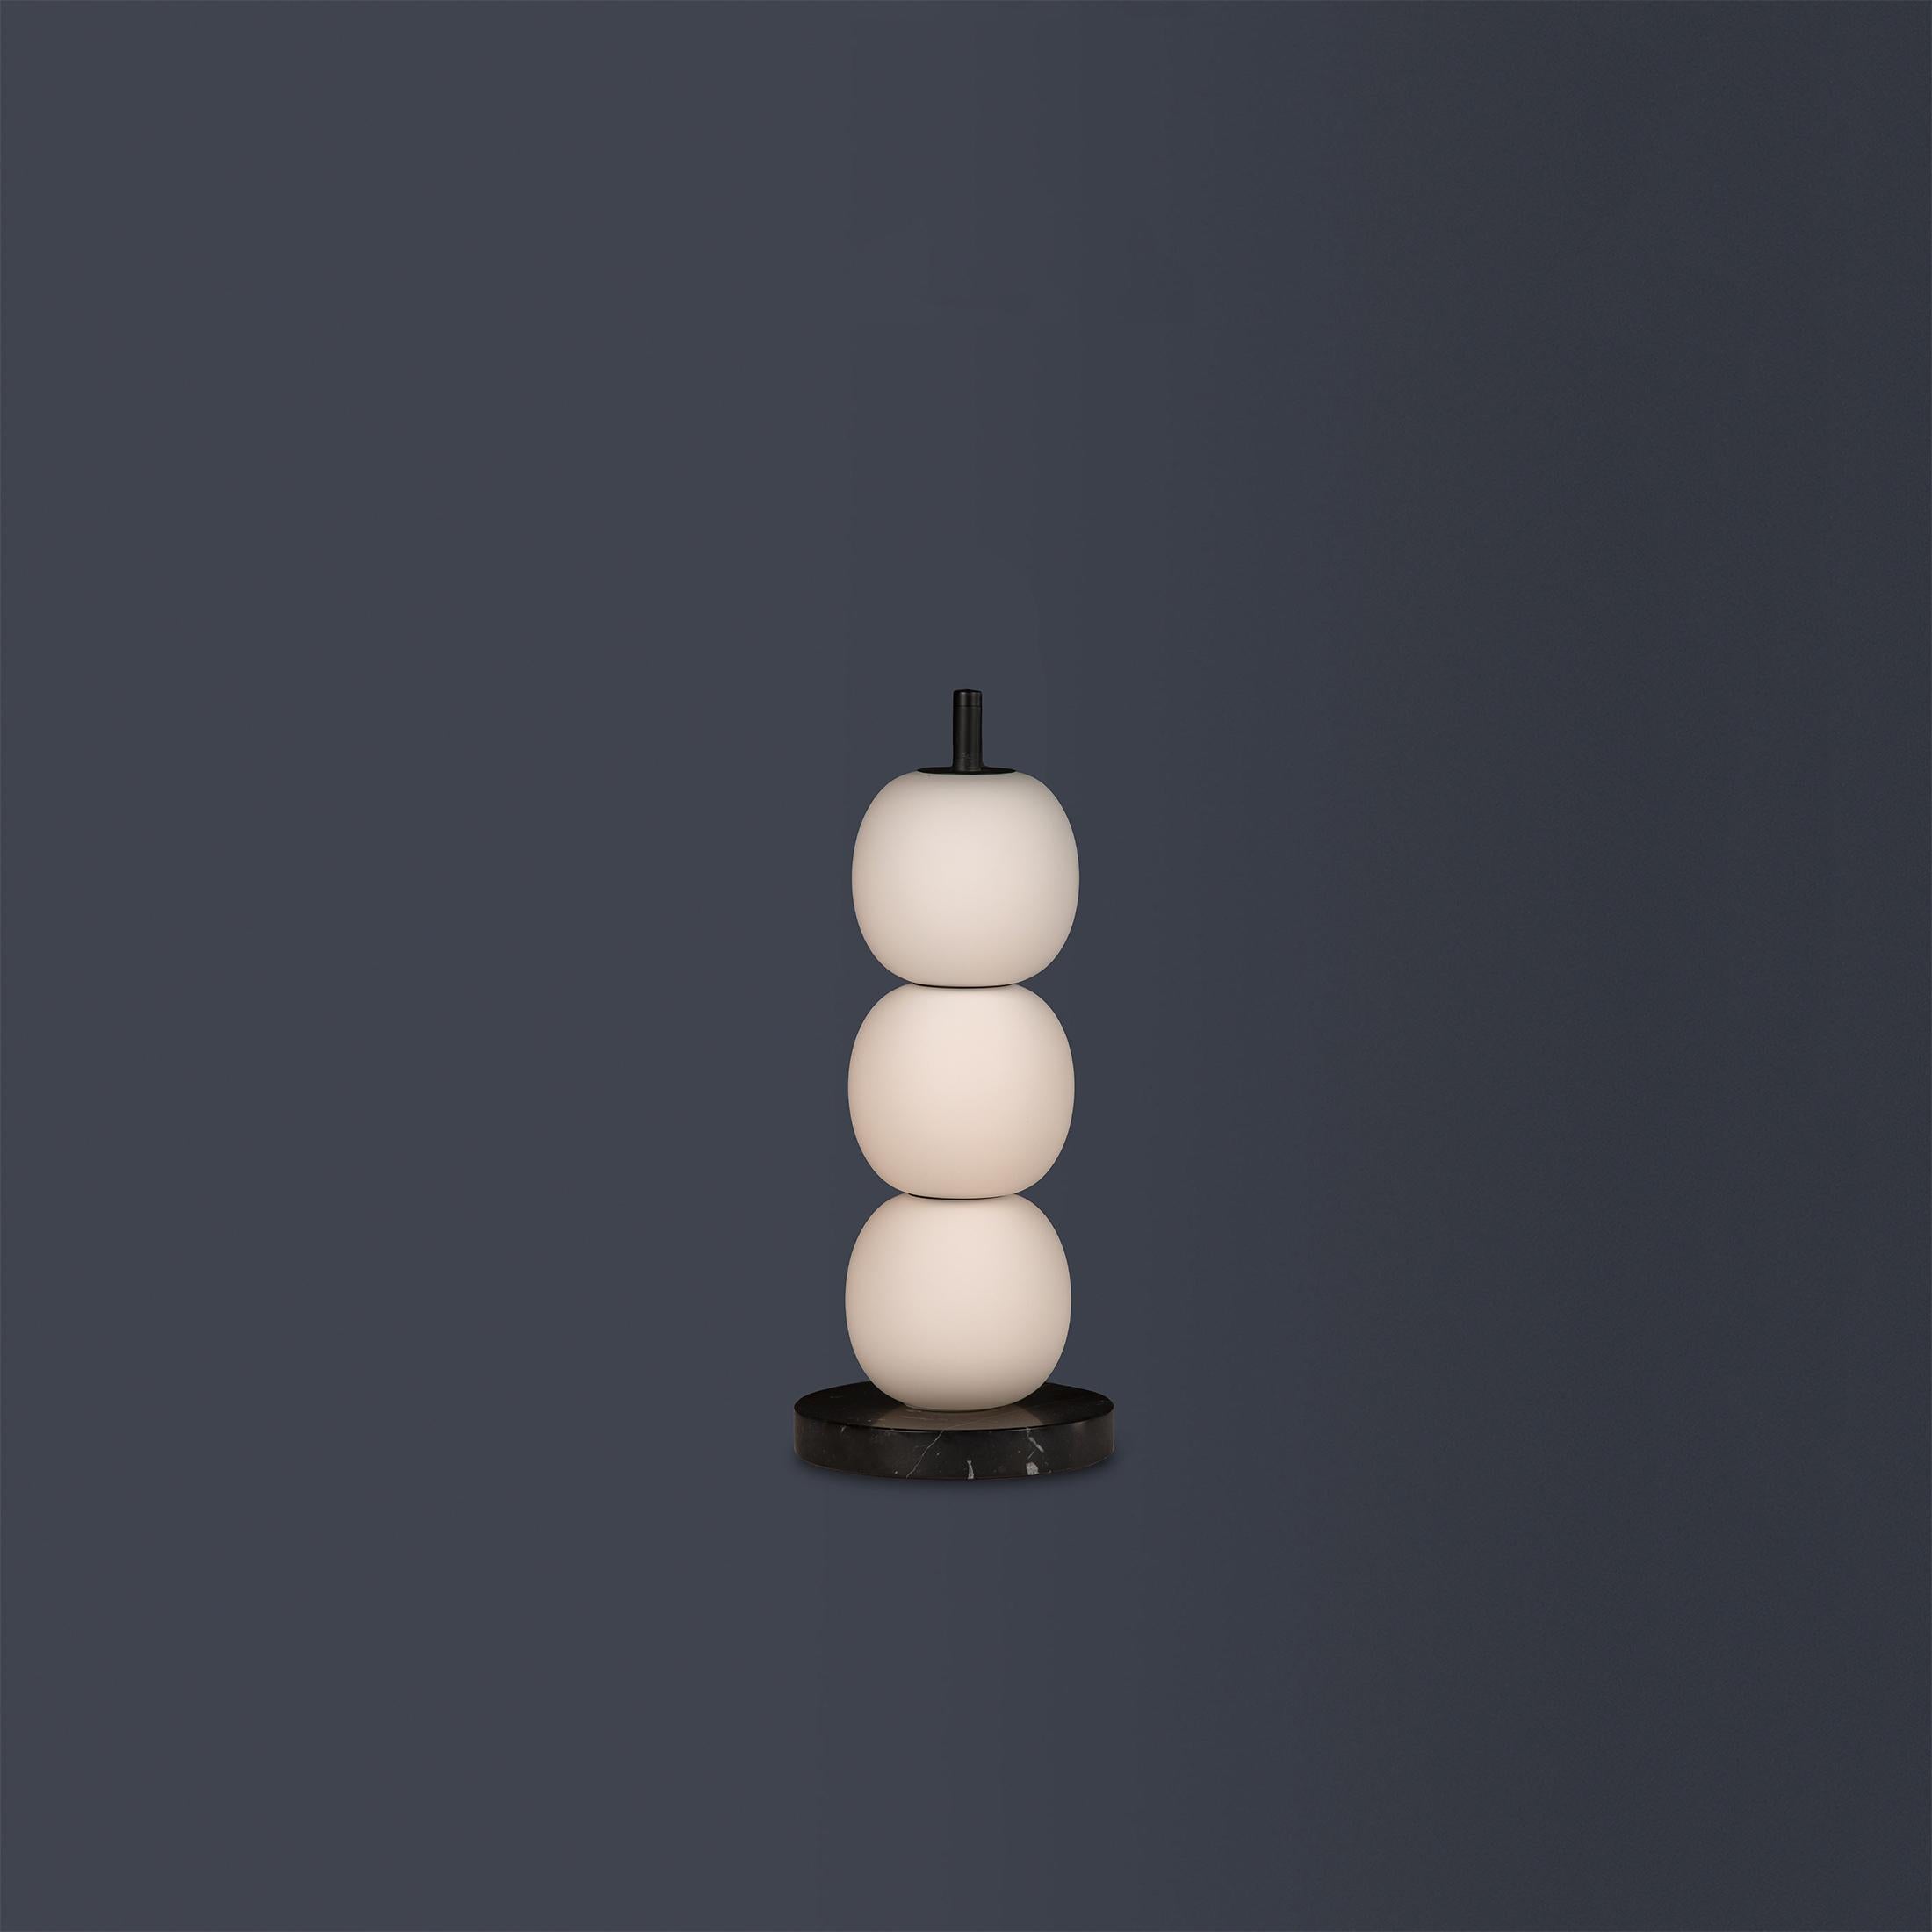 German Table Lamp 'Mainkai 3' by Man of Parts, Verde Alpi Marble For Sale